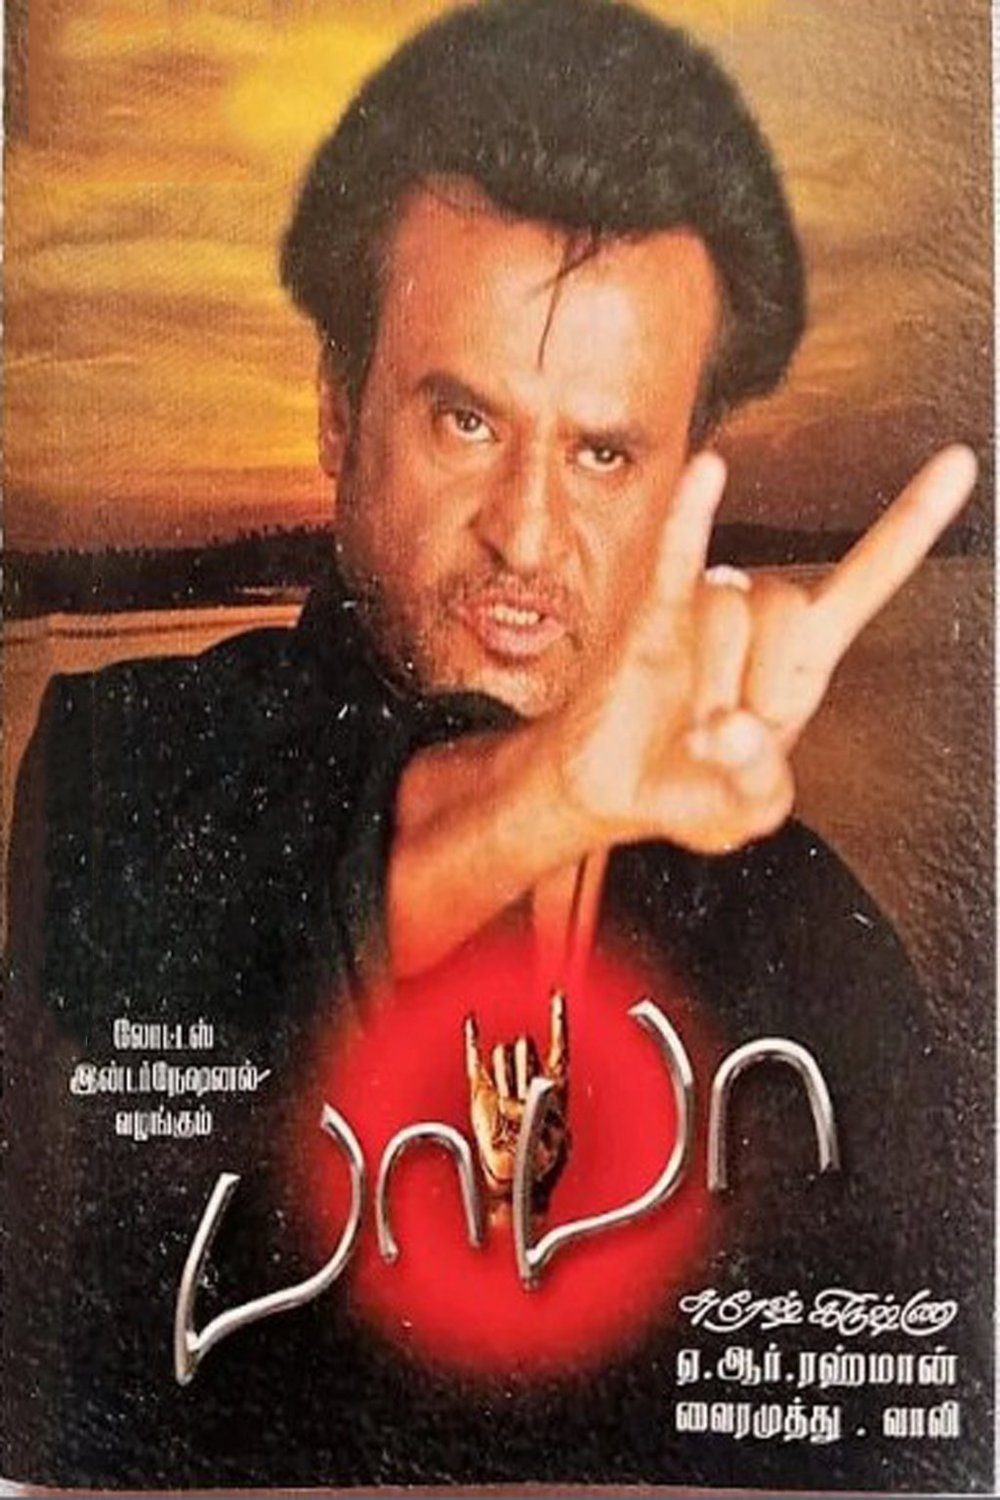 Tamil poster of the movie Baba